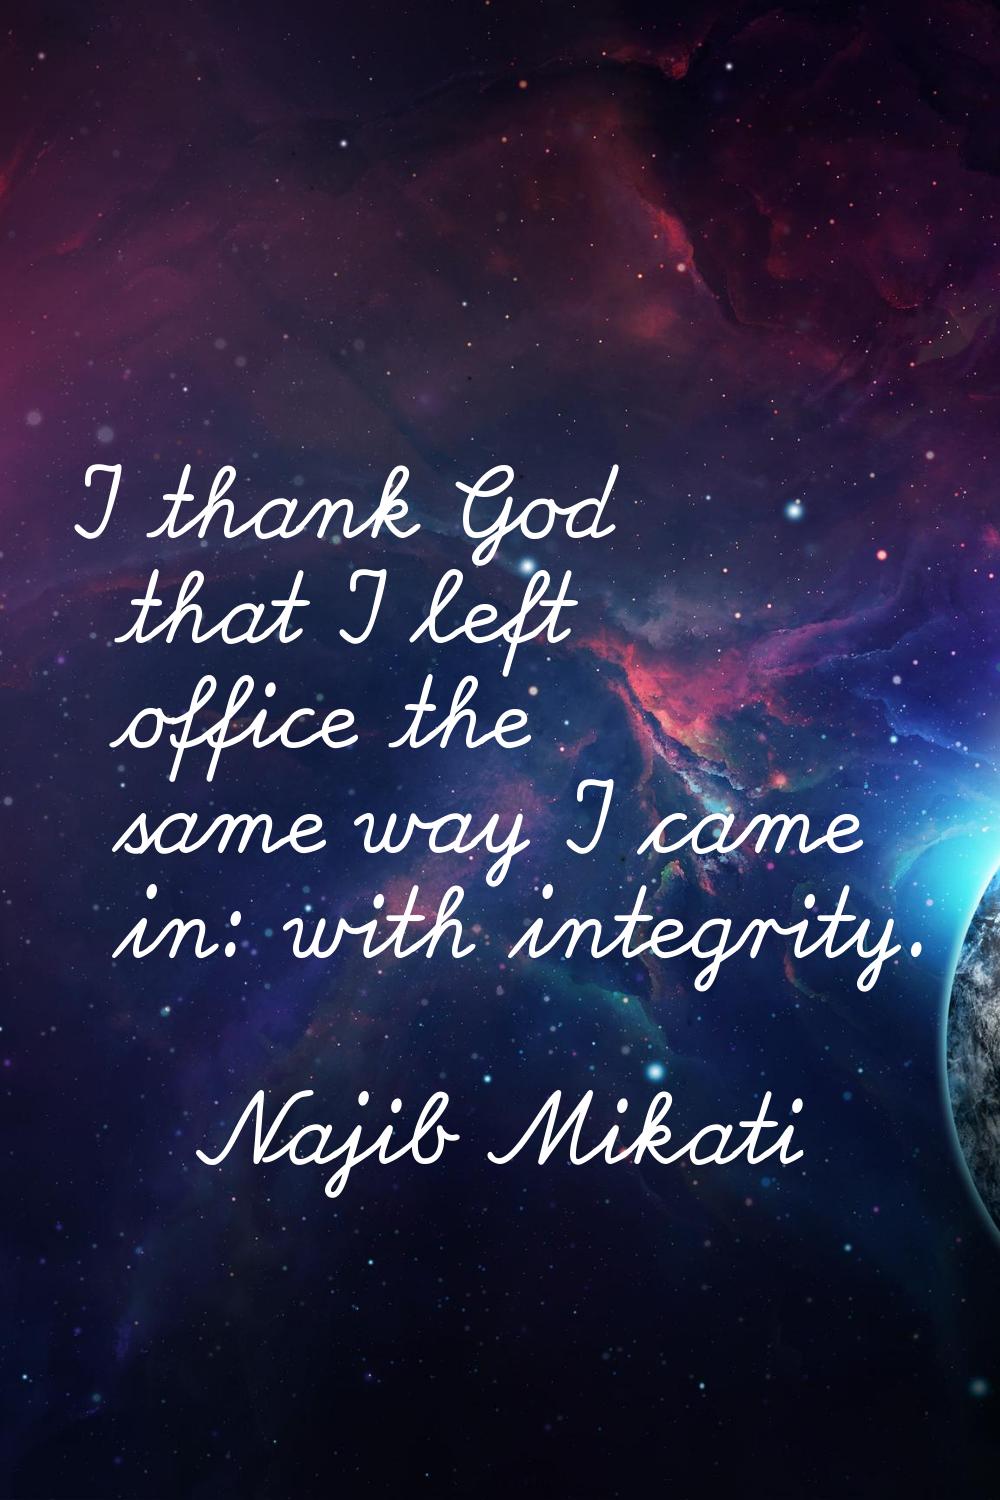 I thank God that I left office the same way I came in: with integrity.